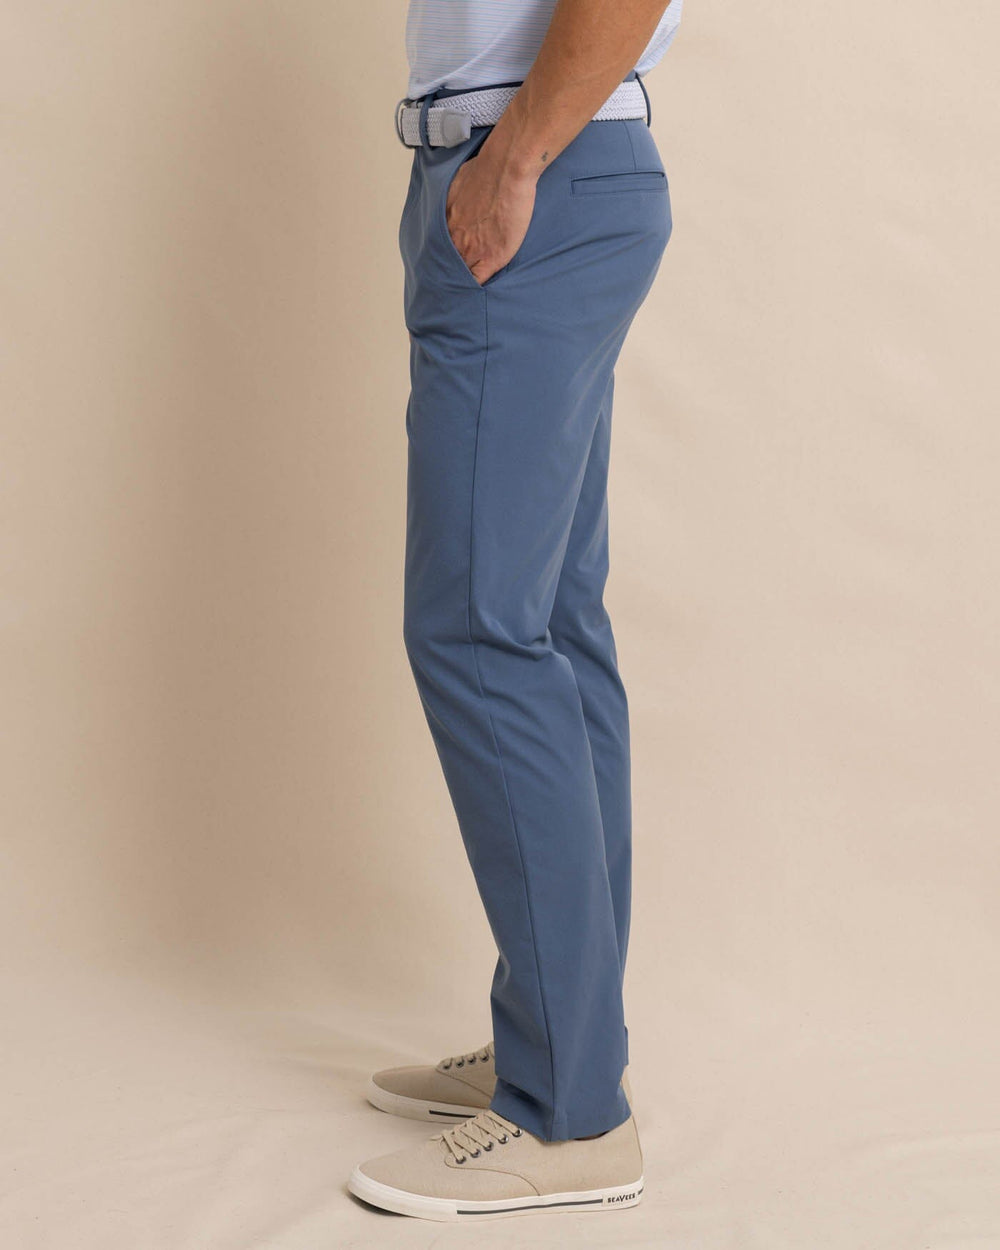 The front view of the Southern Tide Jack Performance Pant Dark Seas by Southern Tide - Dark Seas